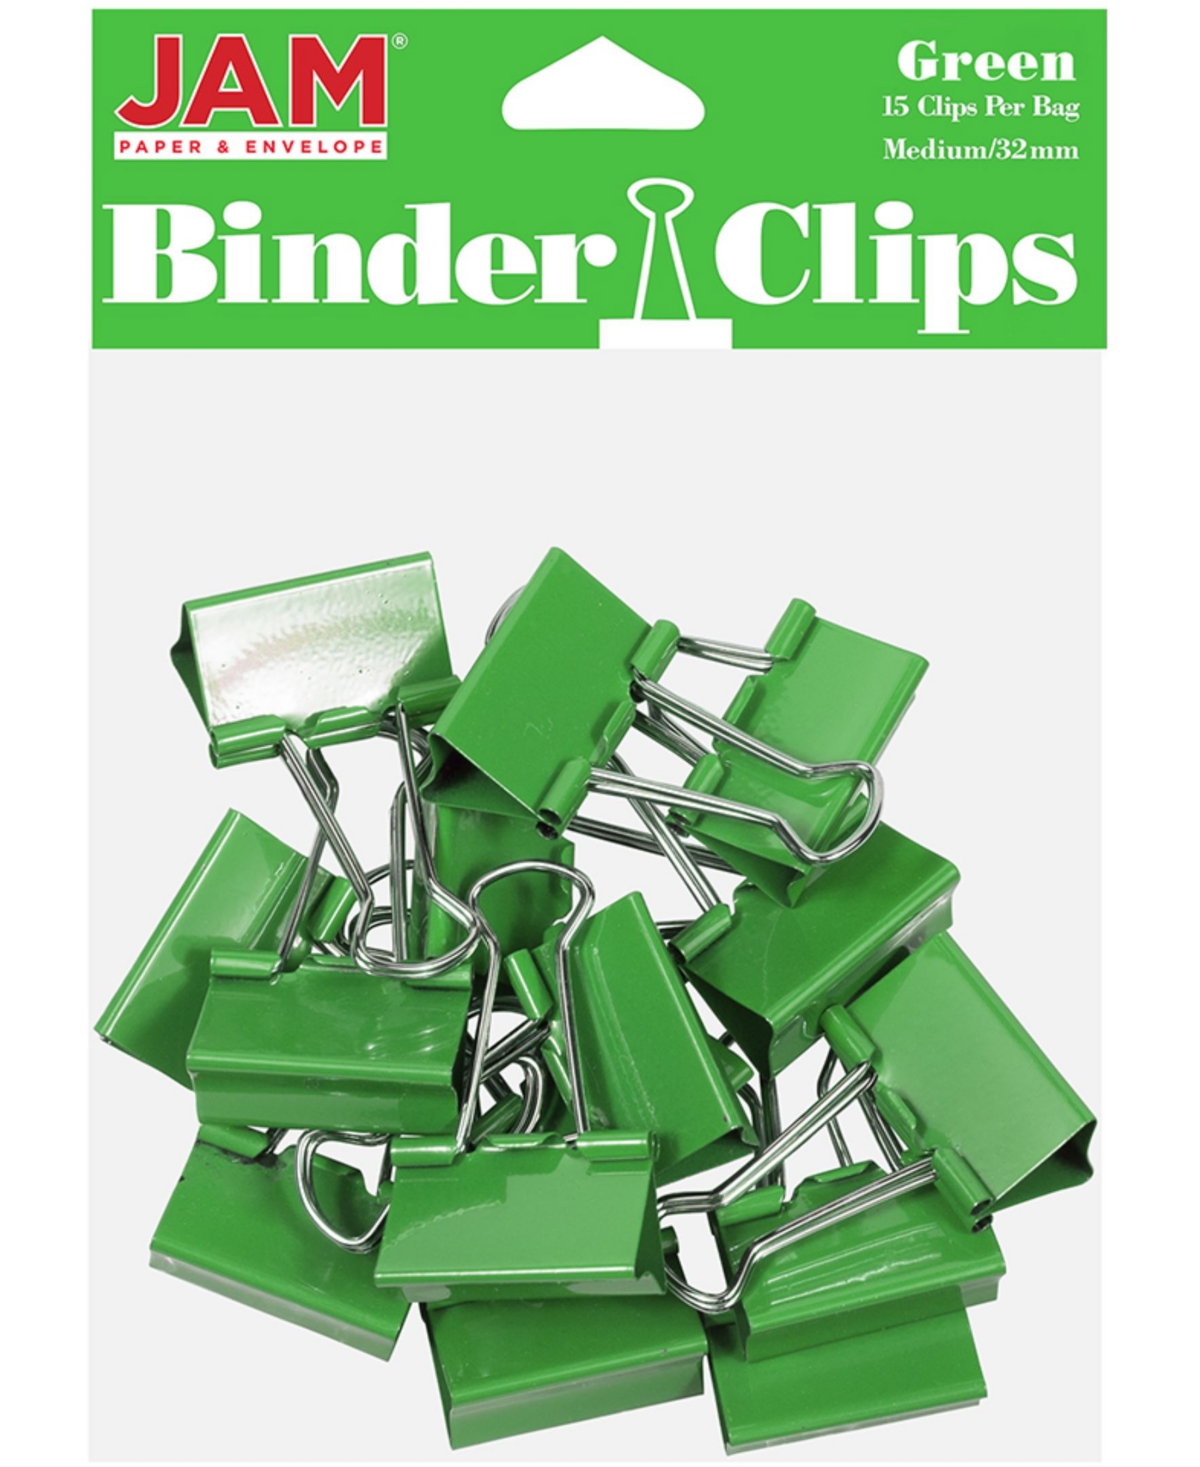 Jam Paper Colorful Binder Clips In Green